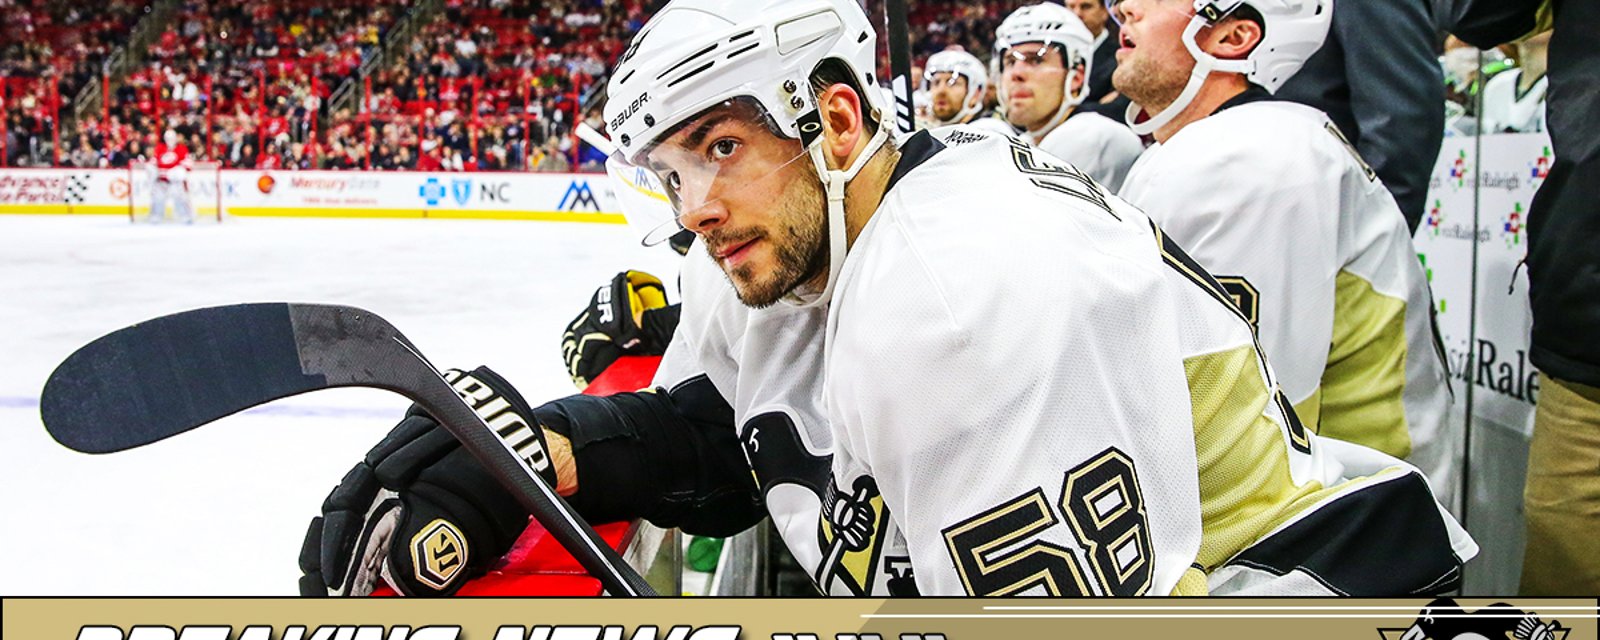 Breaking: New information reveals that Kris Letang’s NHL career may be in jeopardy.